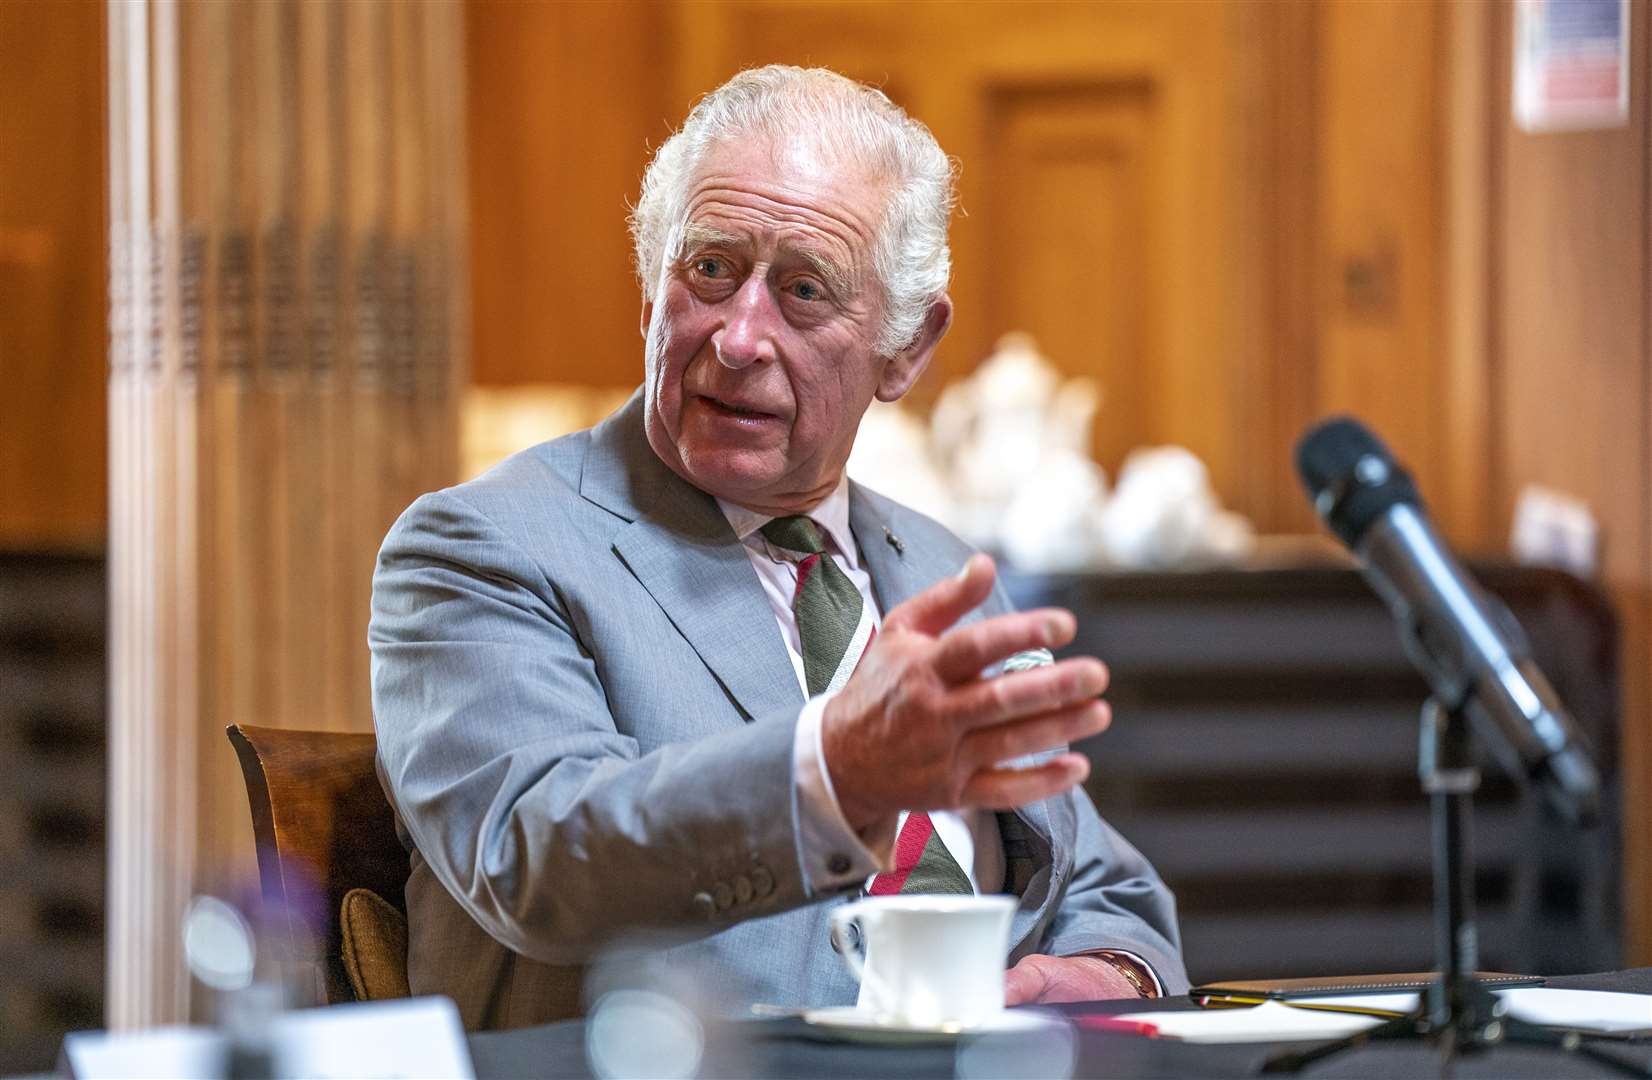 The Prince of Wales during a roundtable with attendees of the Natasha Allergy Research Foundation seminar (Jane Barlow/PA)